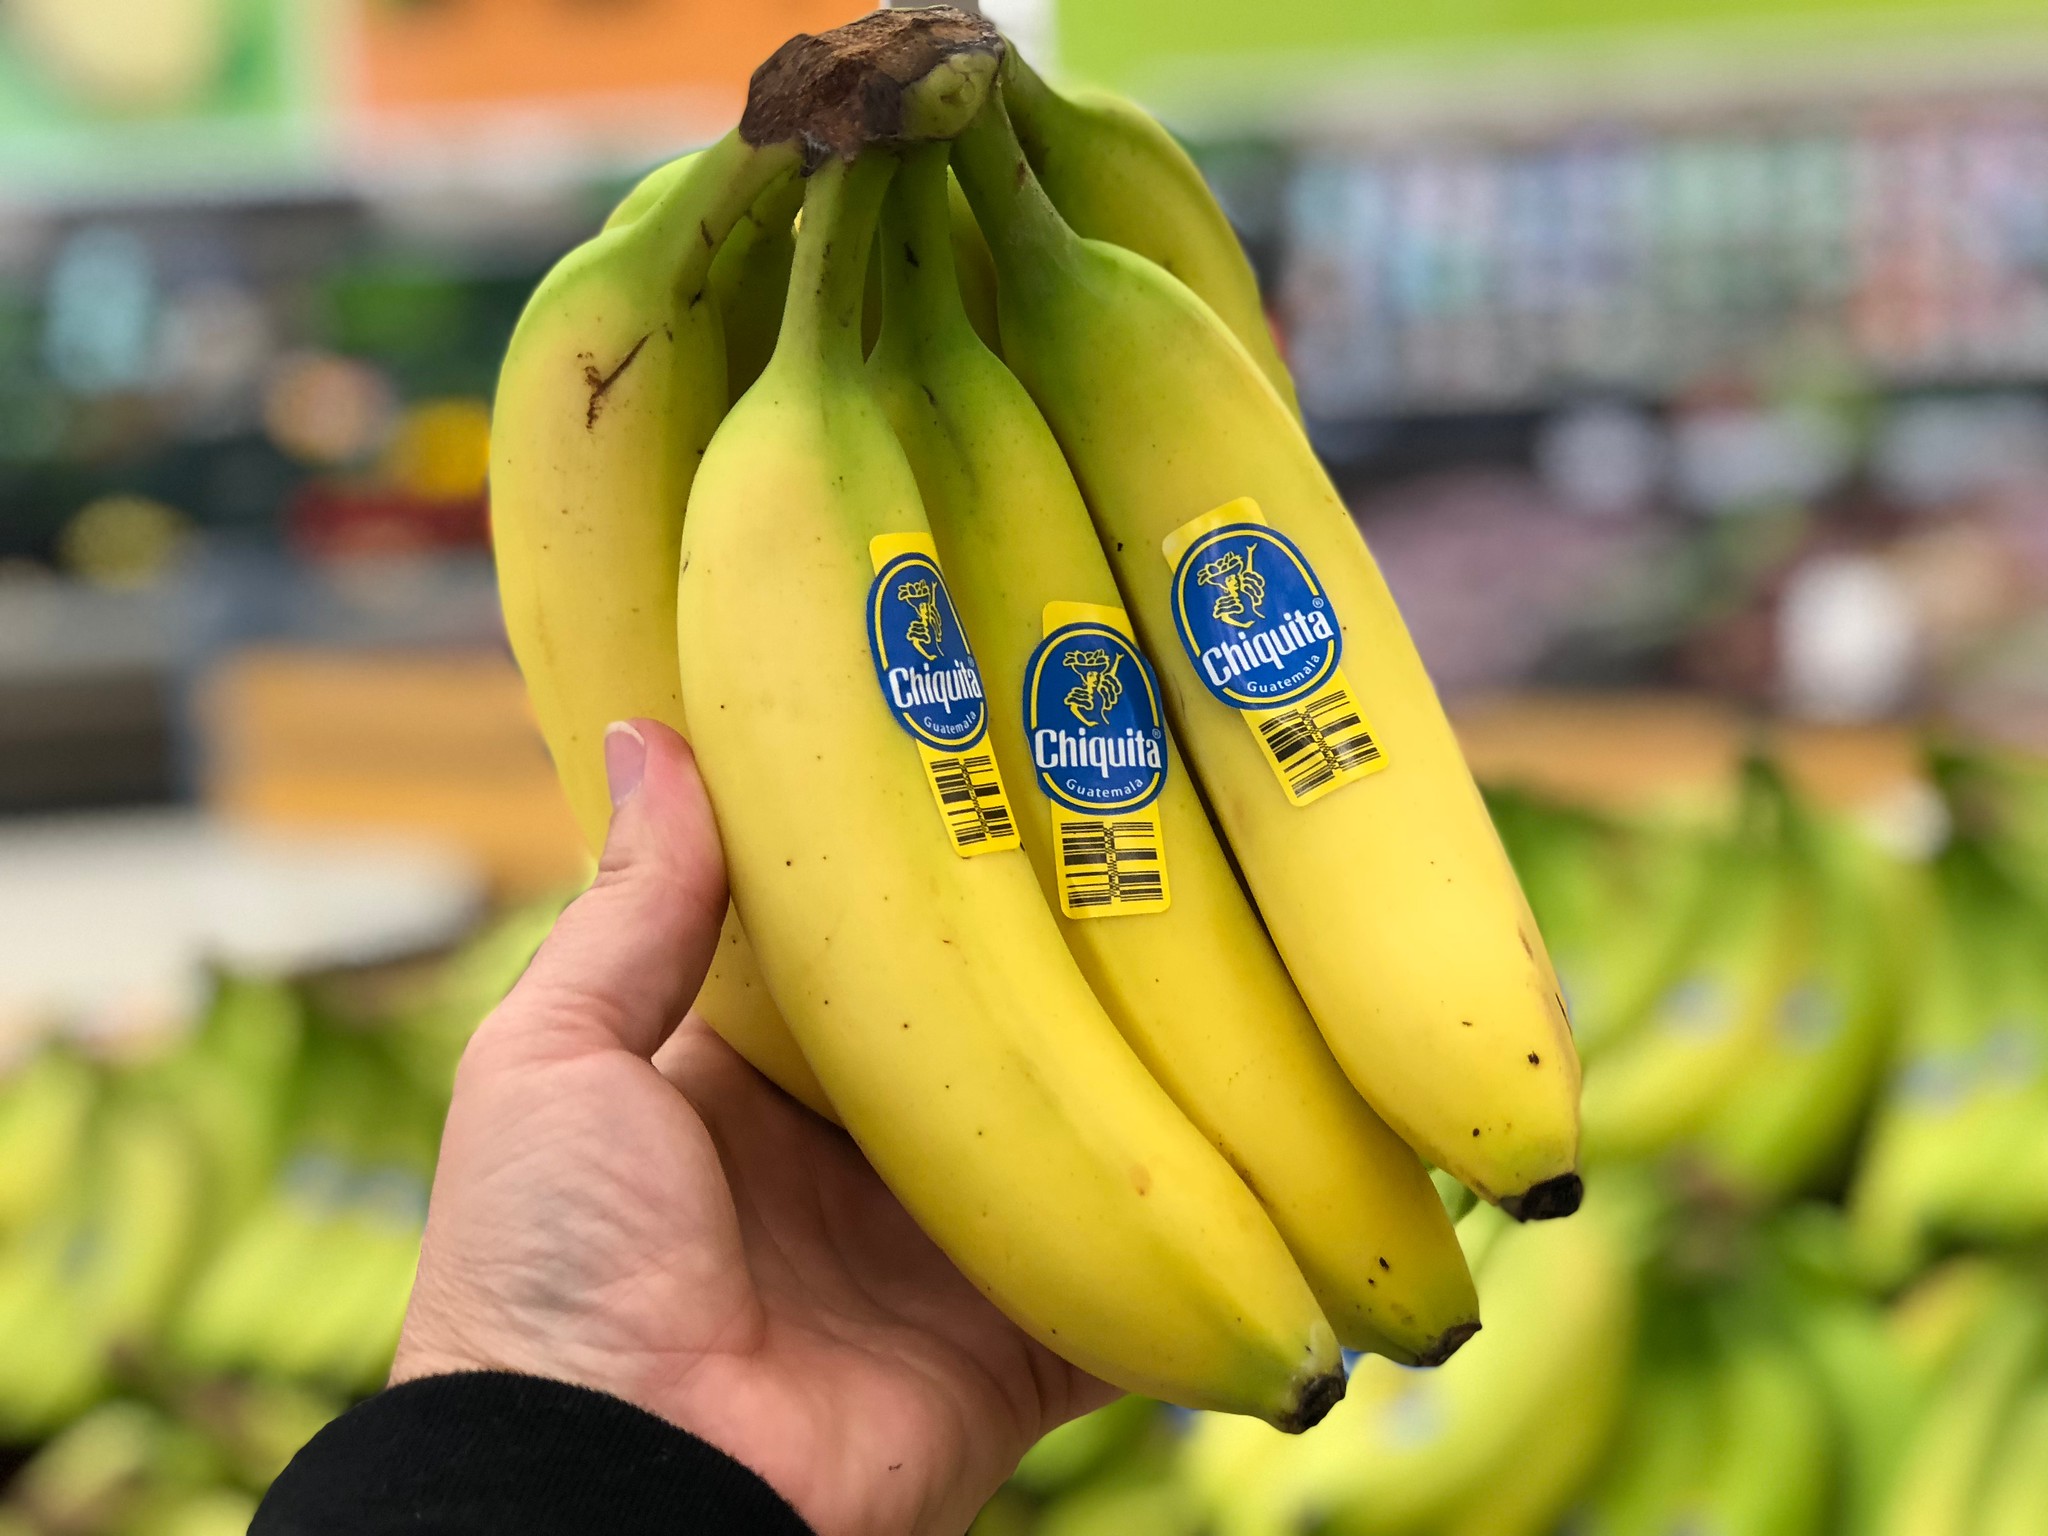 shop and earn rewards with these free mobile apps — bananas